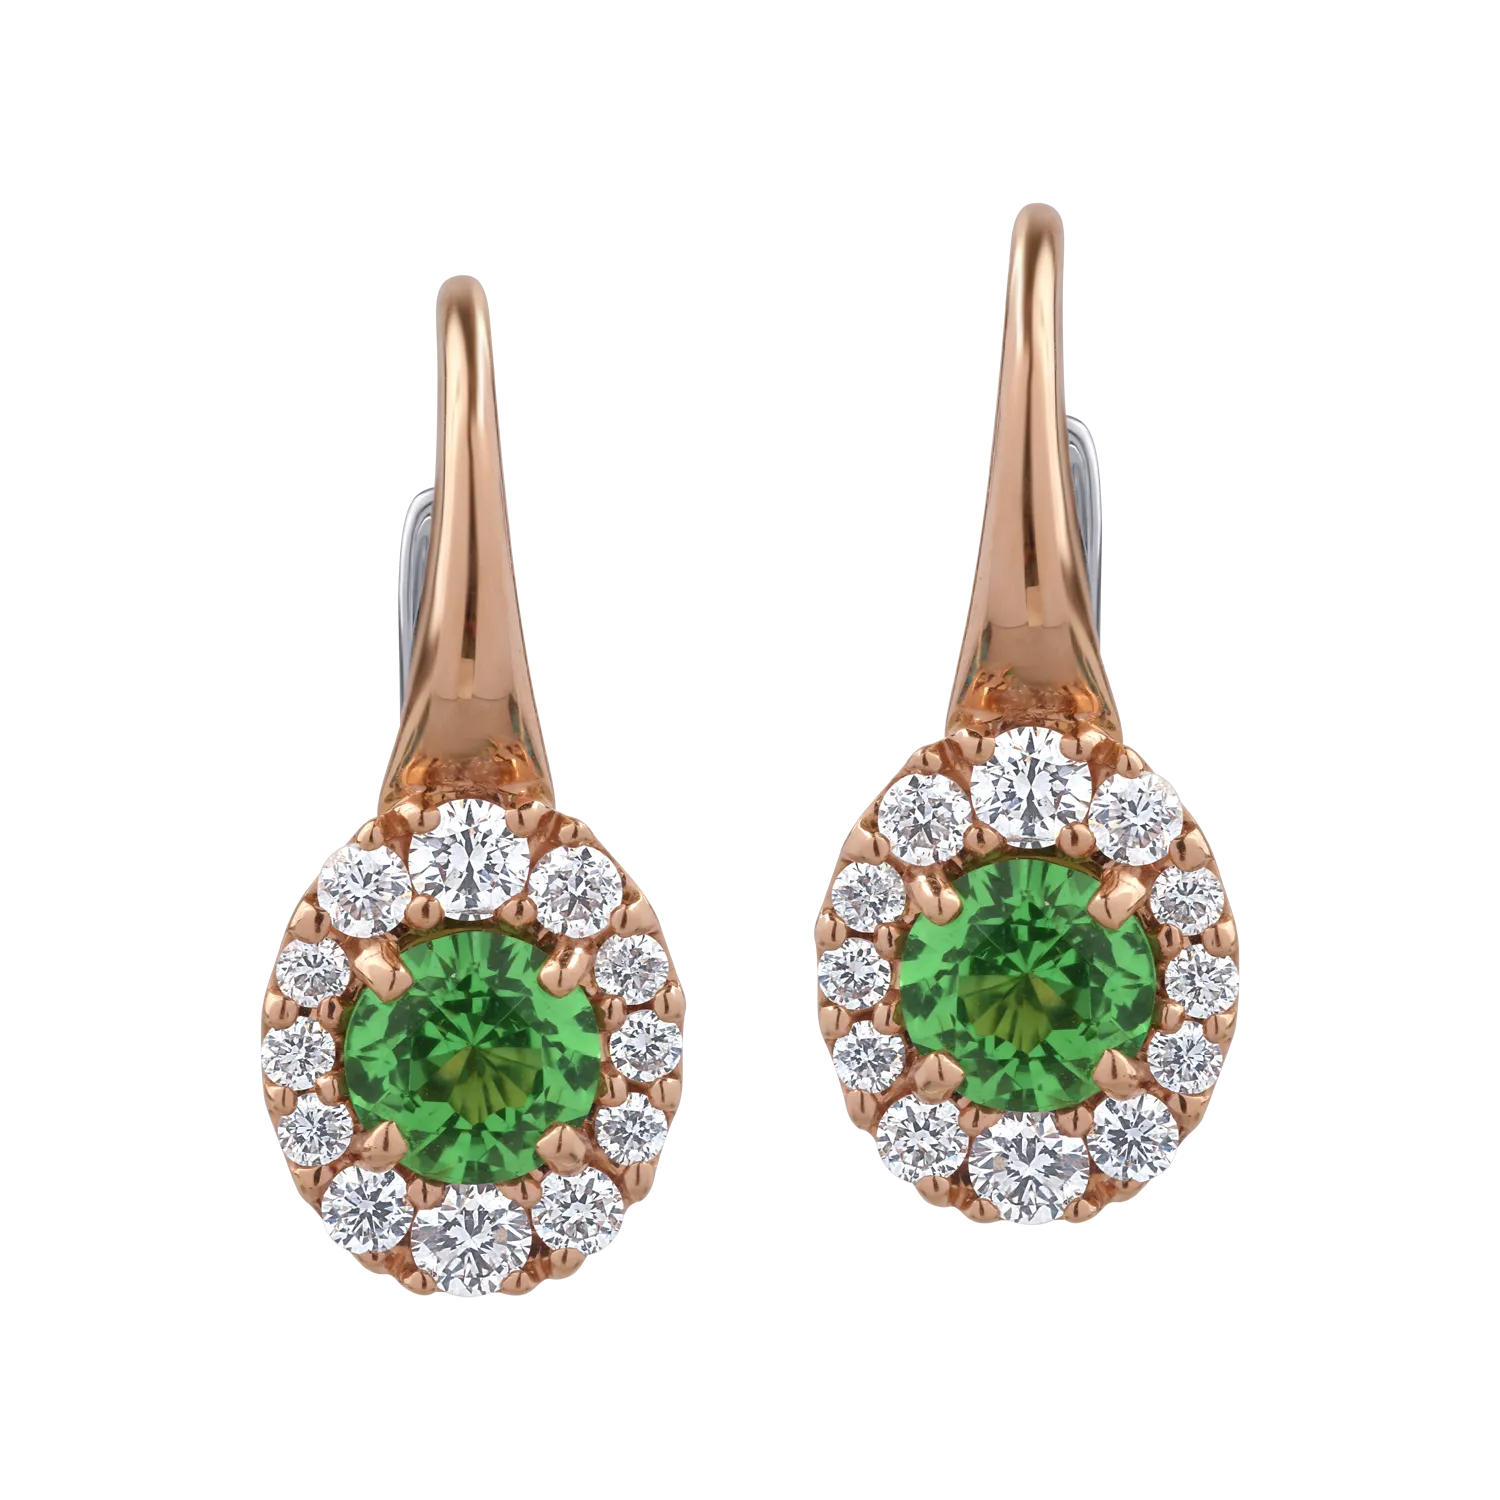 18K rose gold earrings with 0.8ct tsavorite and 0.36ct diamonds